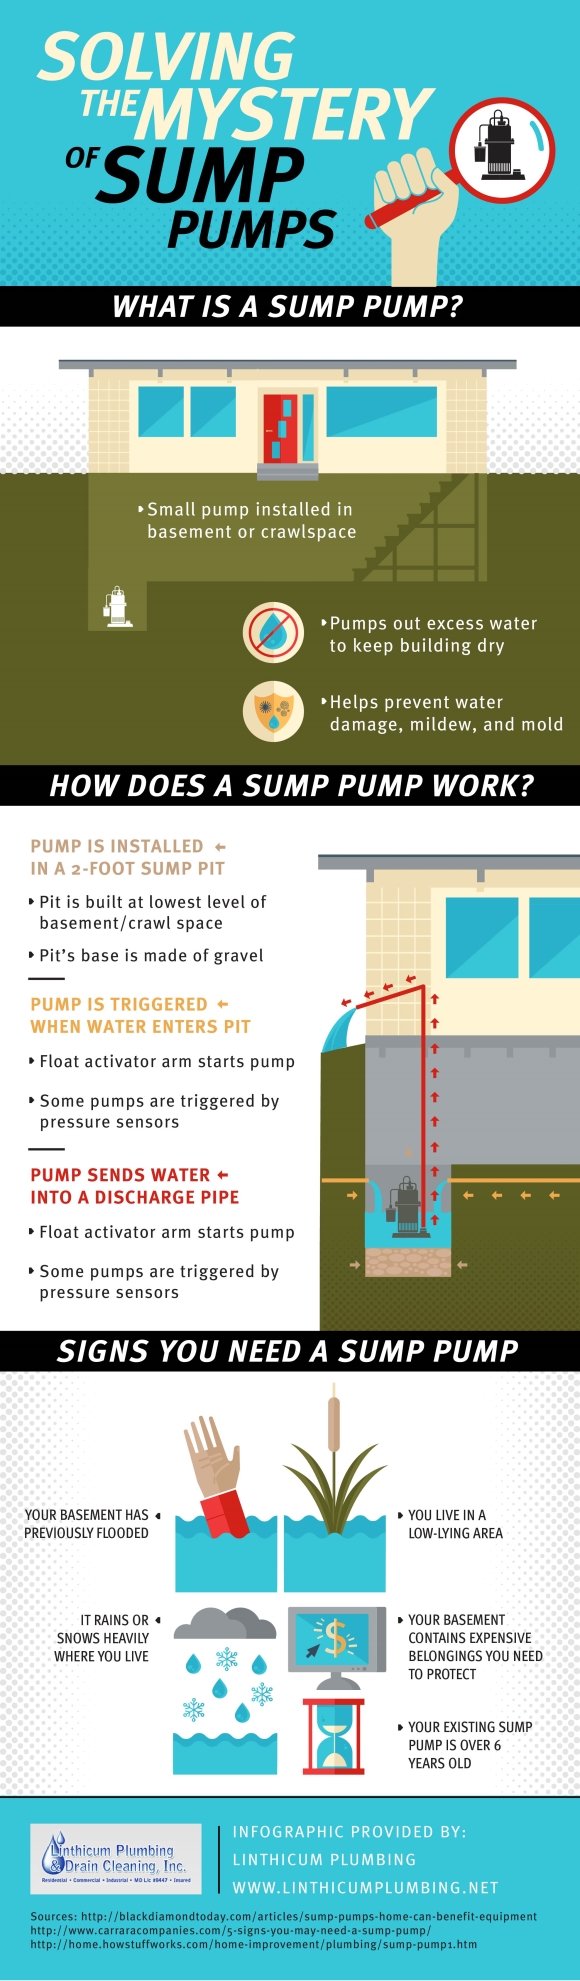 solving-the-mystery-of-sump-pumps